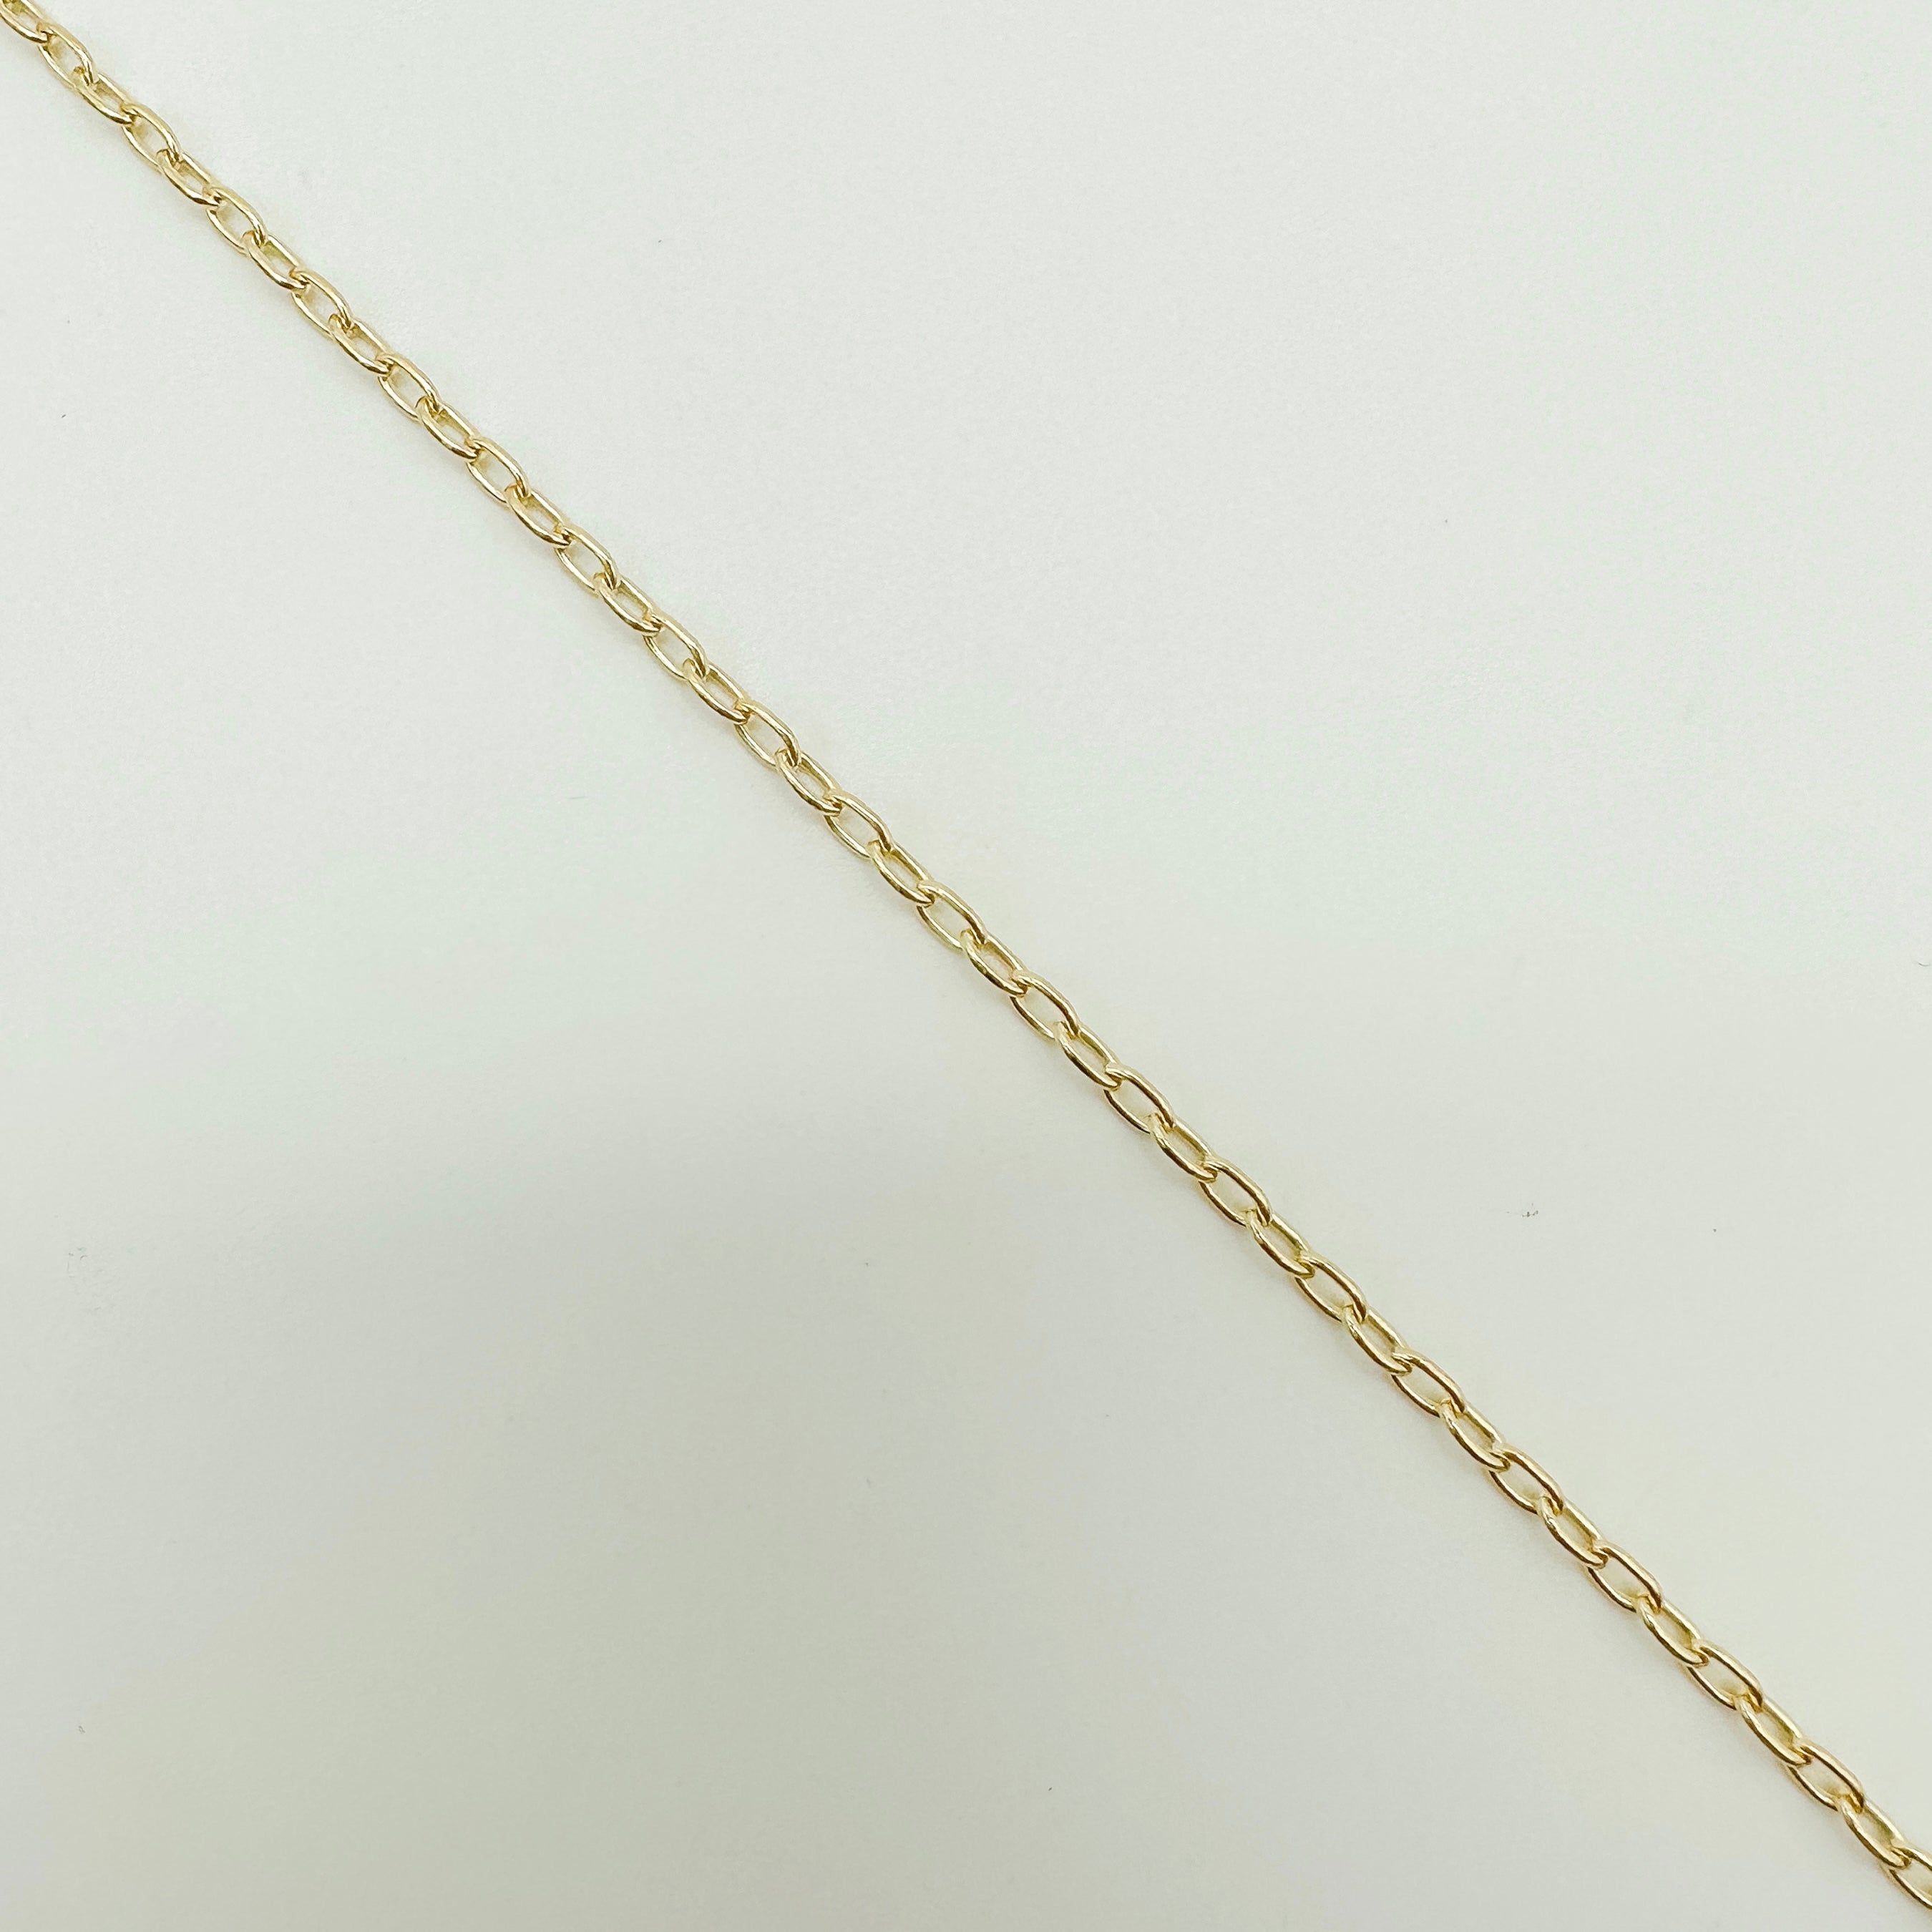 gold filled paperclip chain / permanent jewelry supplies / wholesale chain by the foot / gold filled chain